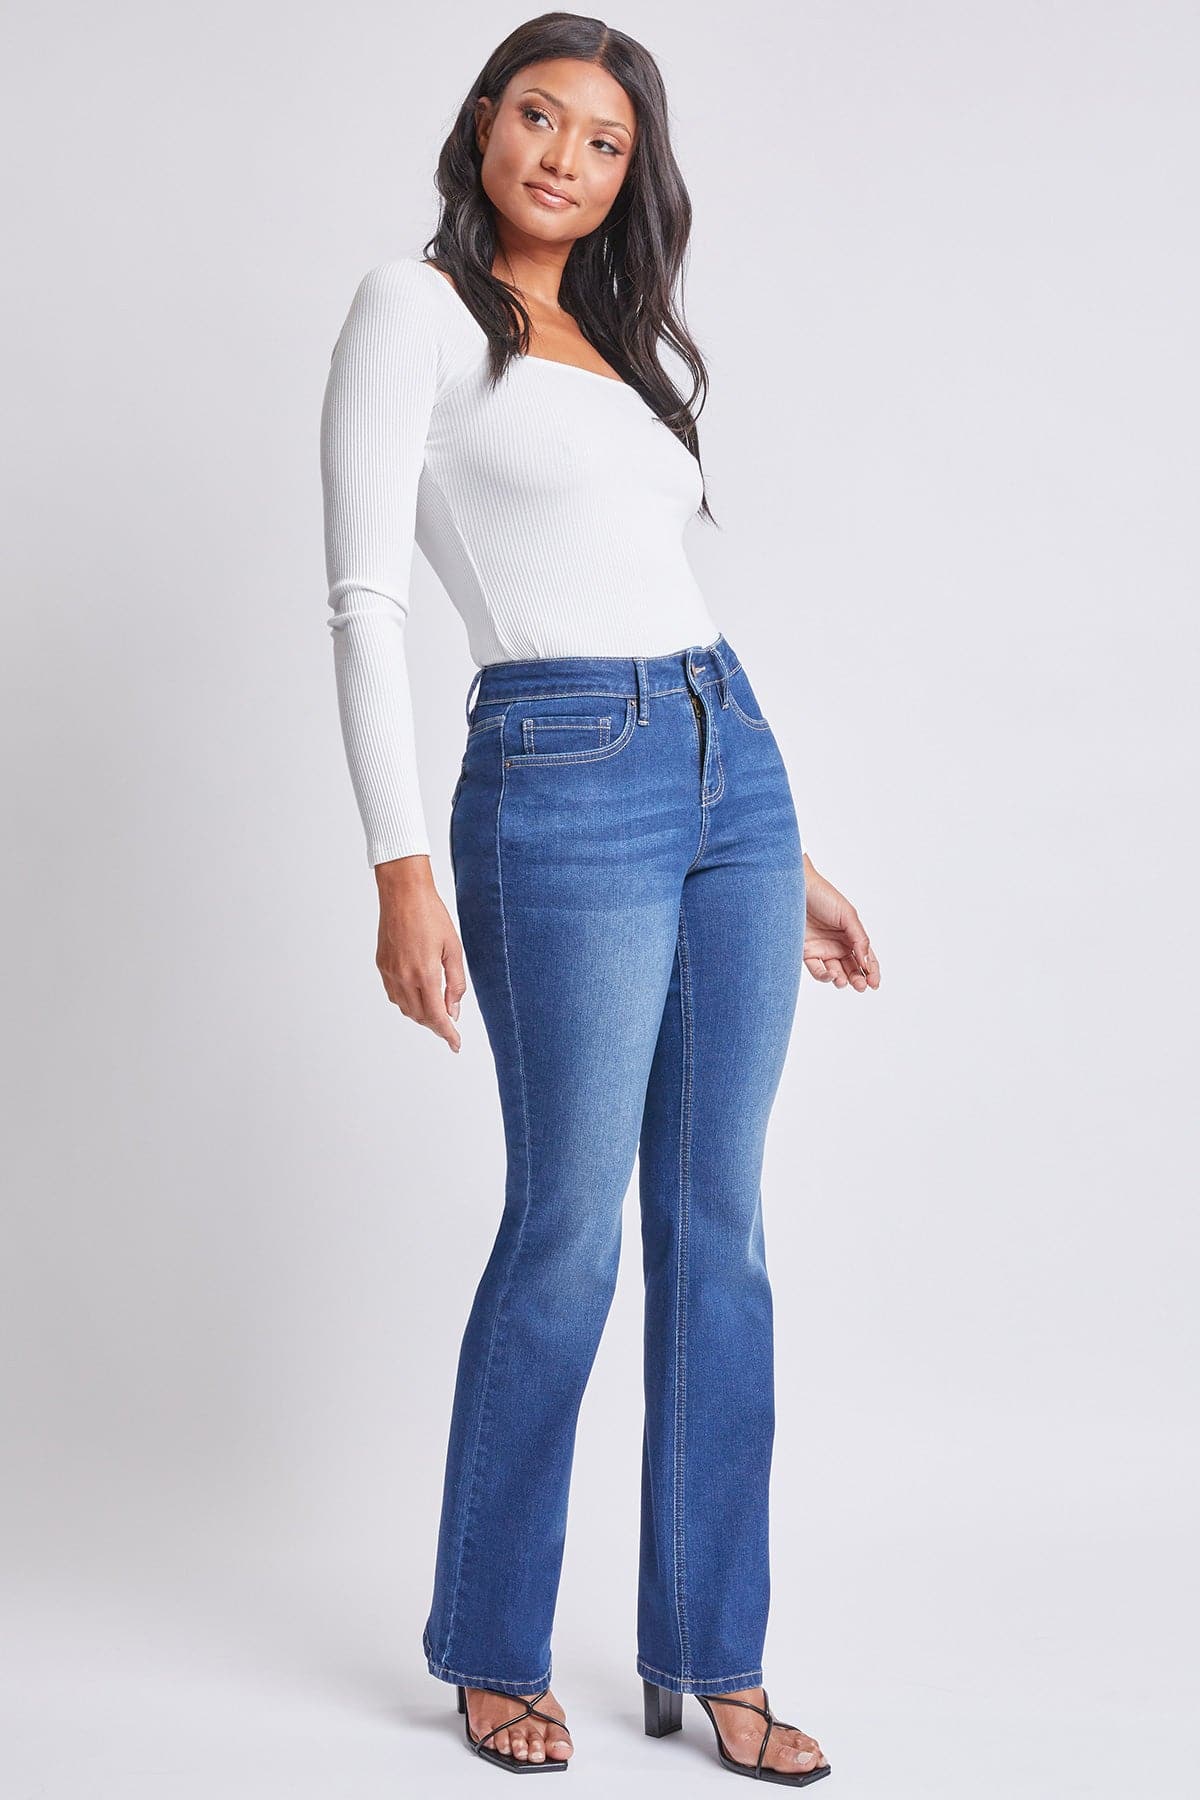 Women's Sustainable High Rise Flap Pocket Bootcut Jeans